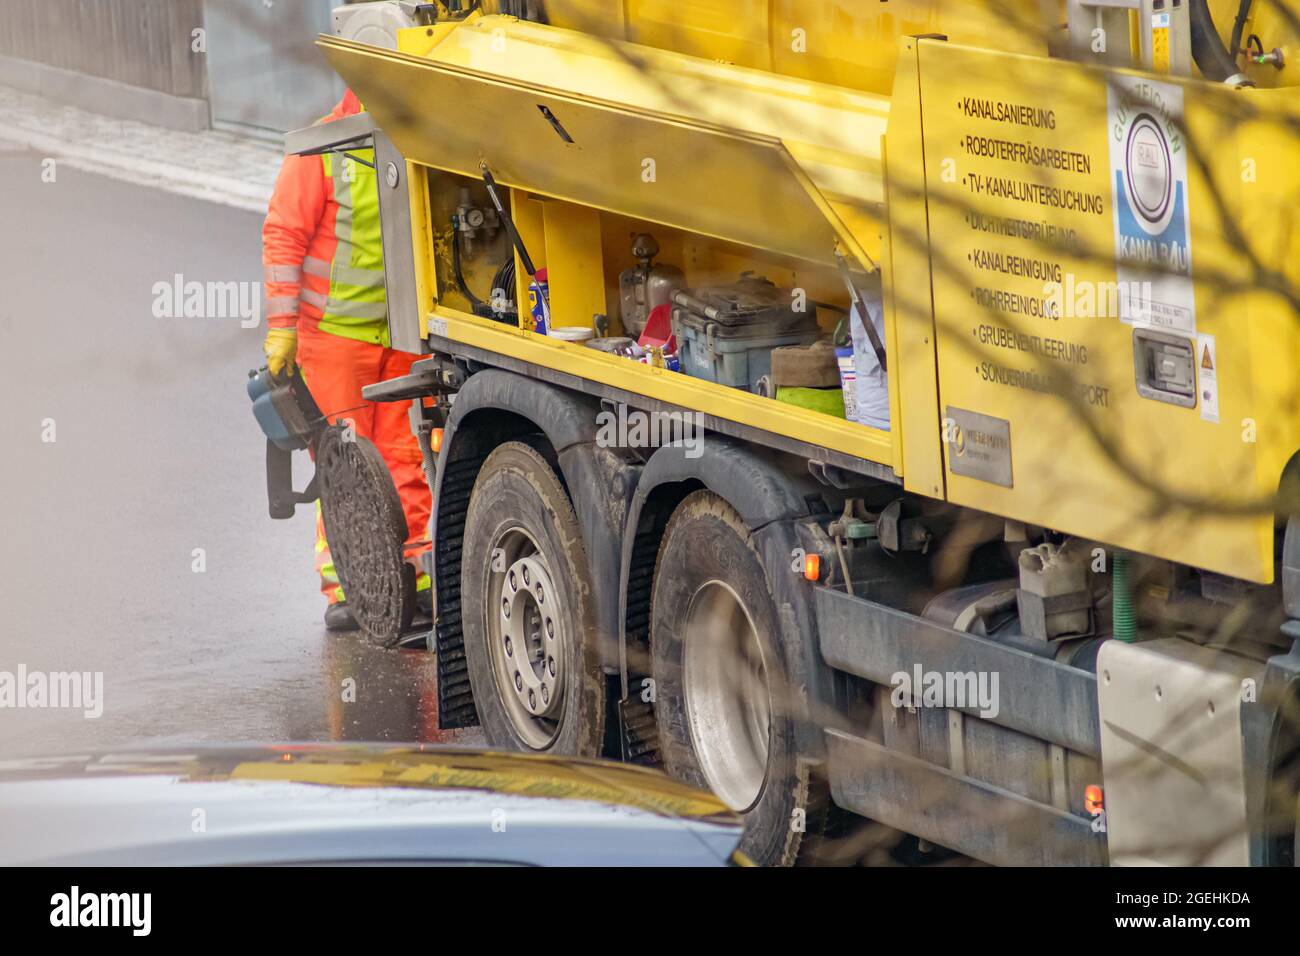 Maintenance at a manhole with a unrecognizable man, working behind the sewer cleaning vehicle on the open street. Stock Photo